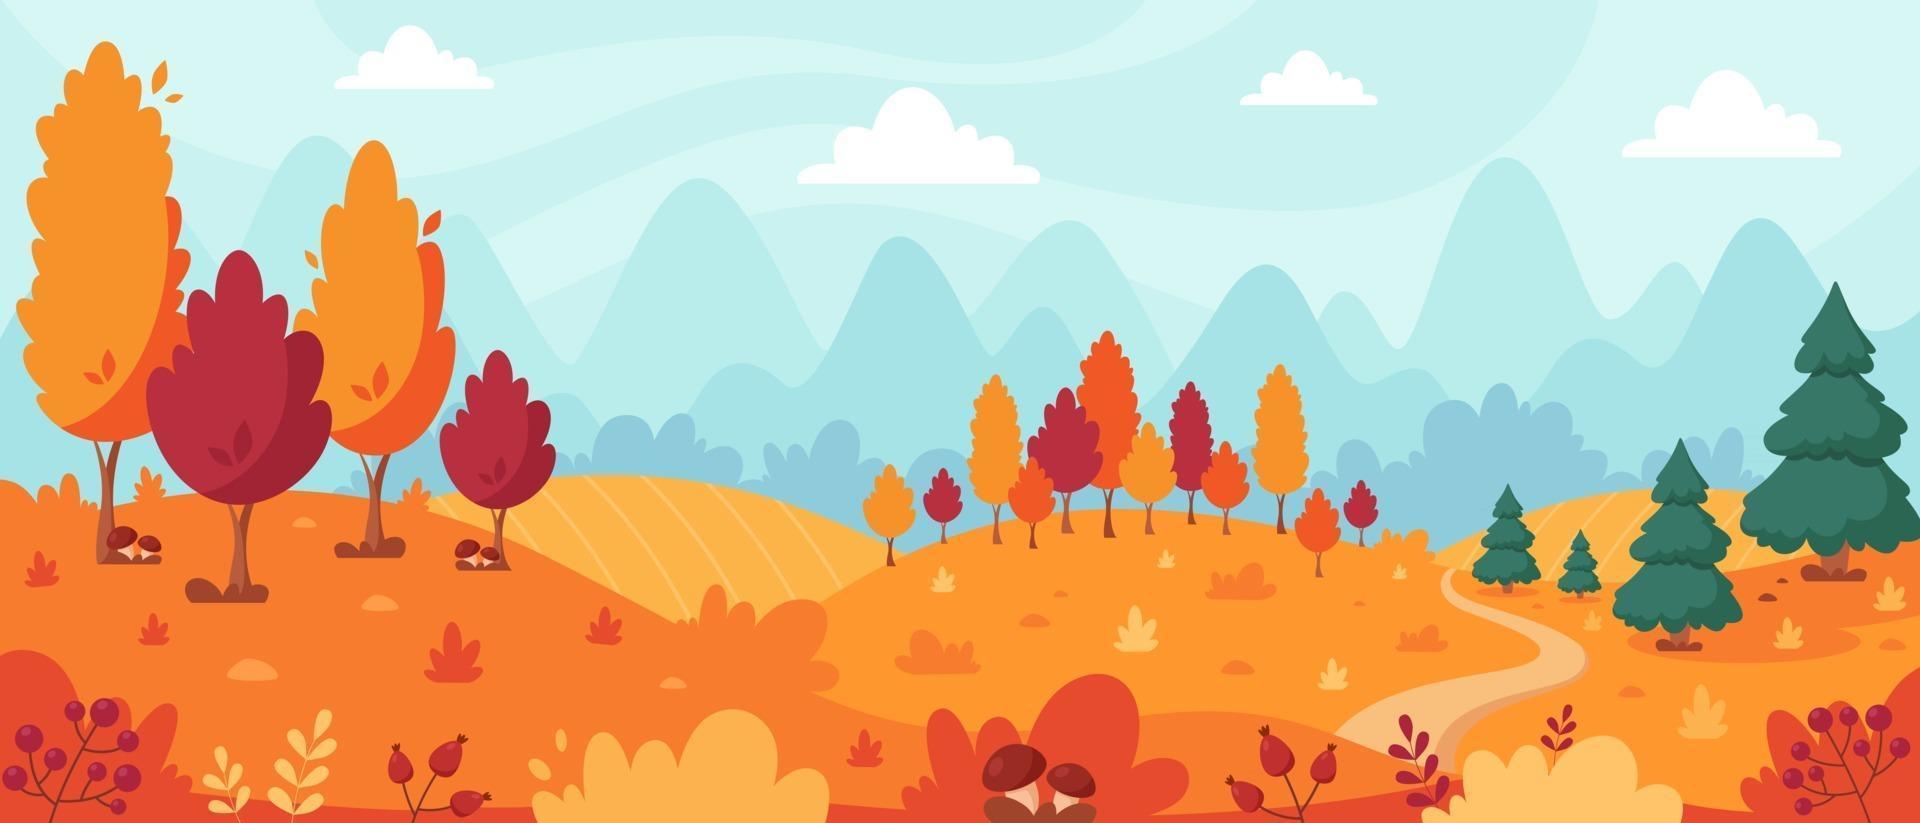 Autumn landscape with trees, mountains, fields, leaves. Countryside landscape. Autumn background. vector